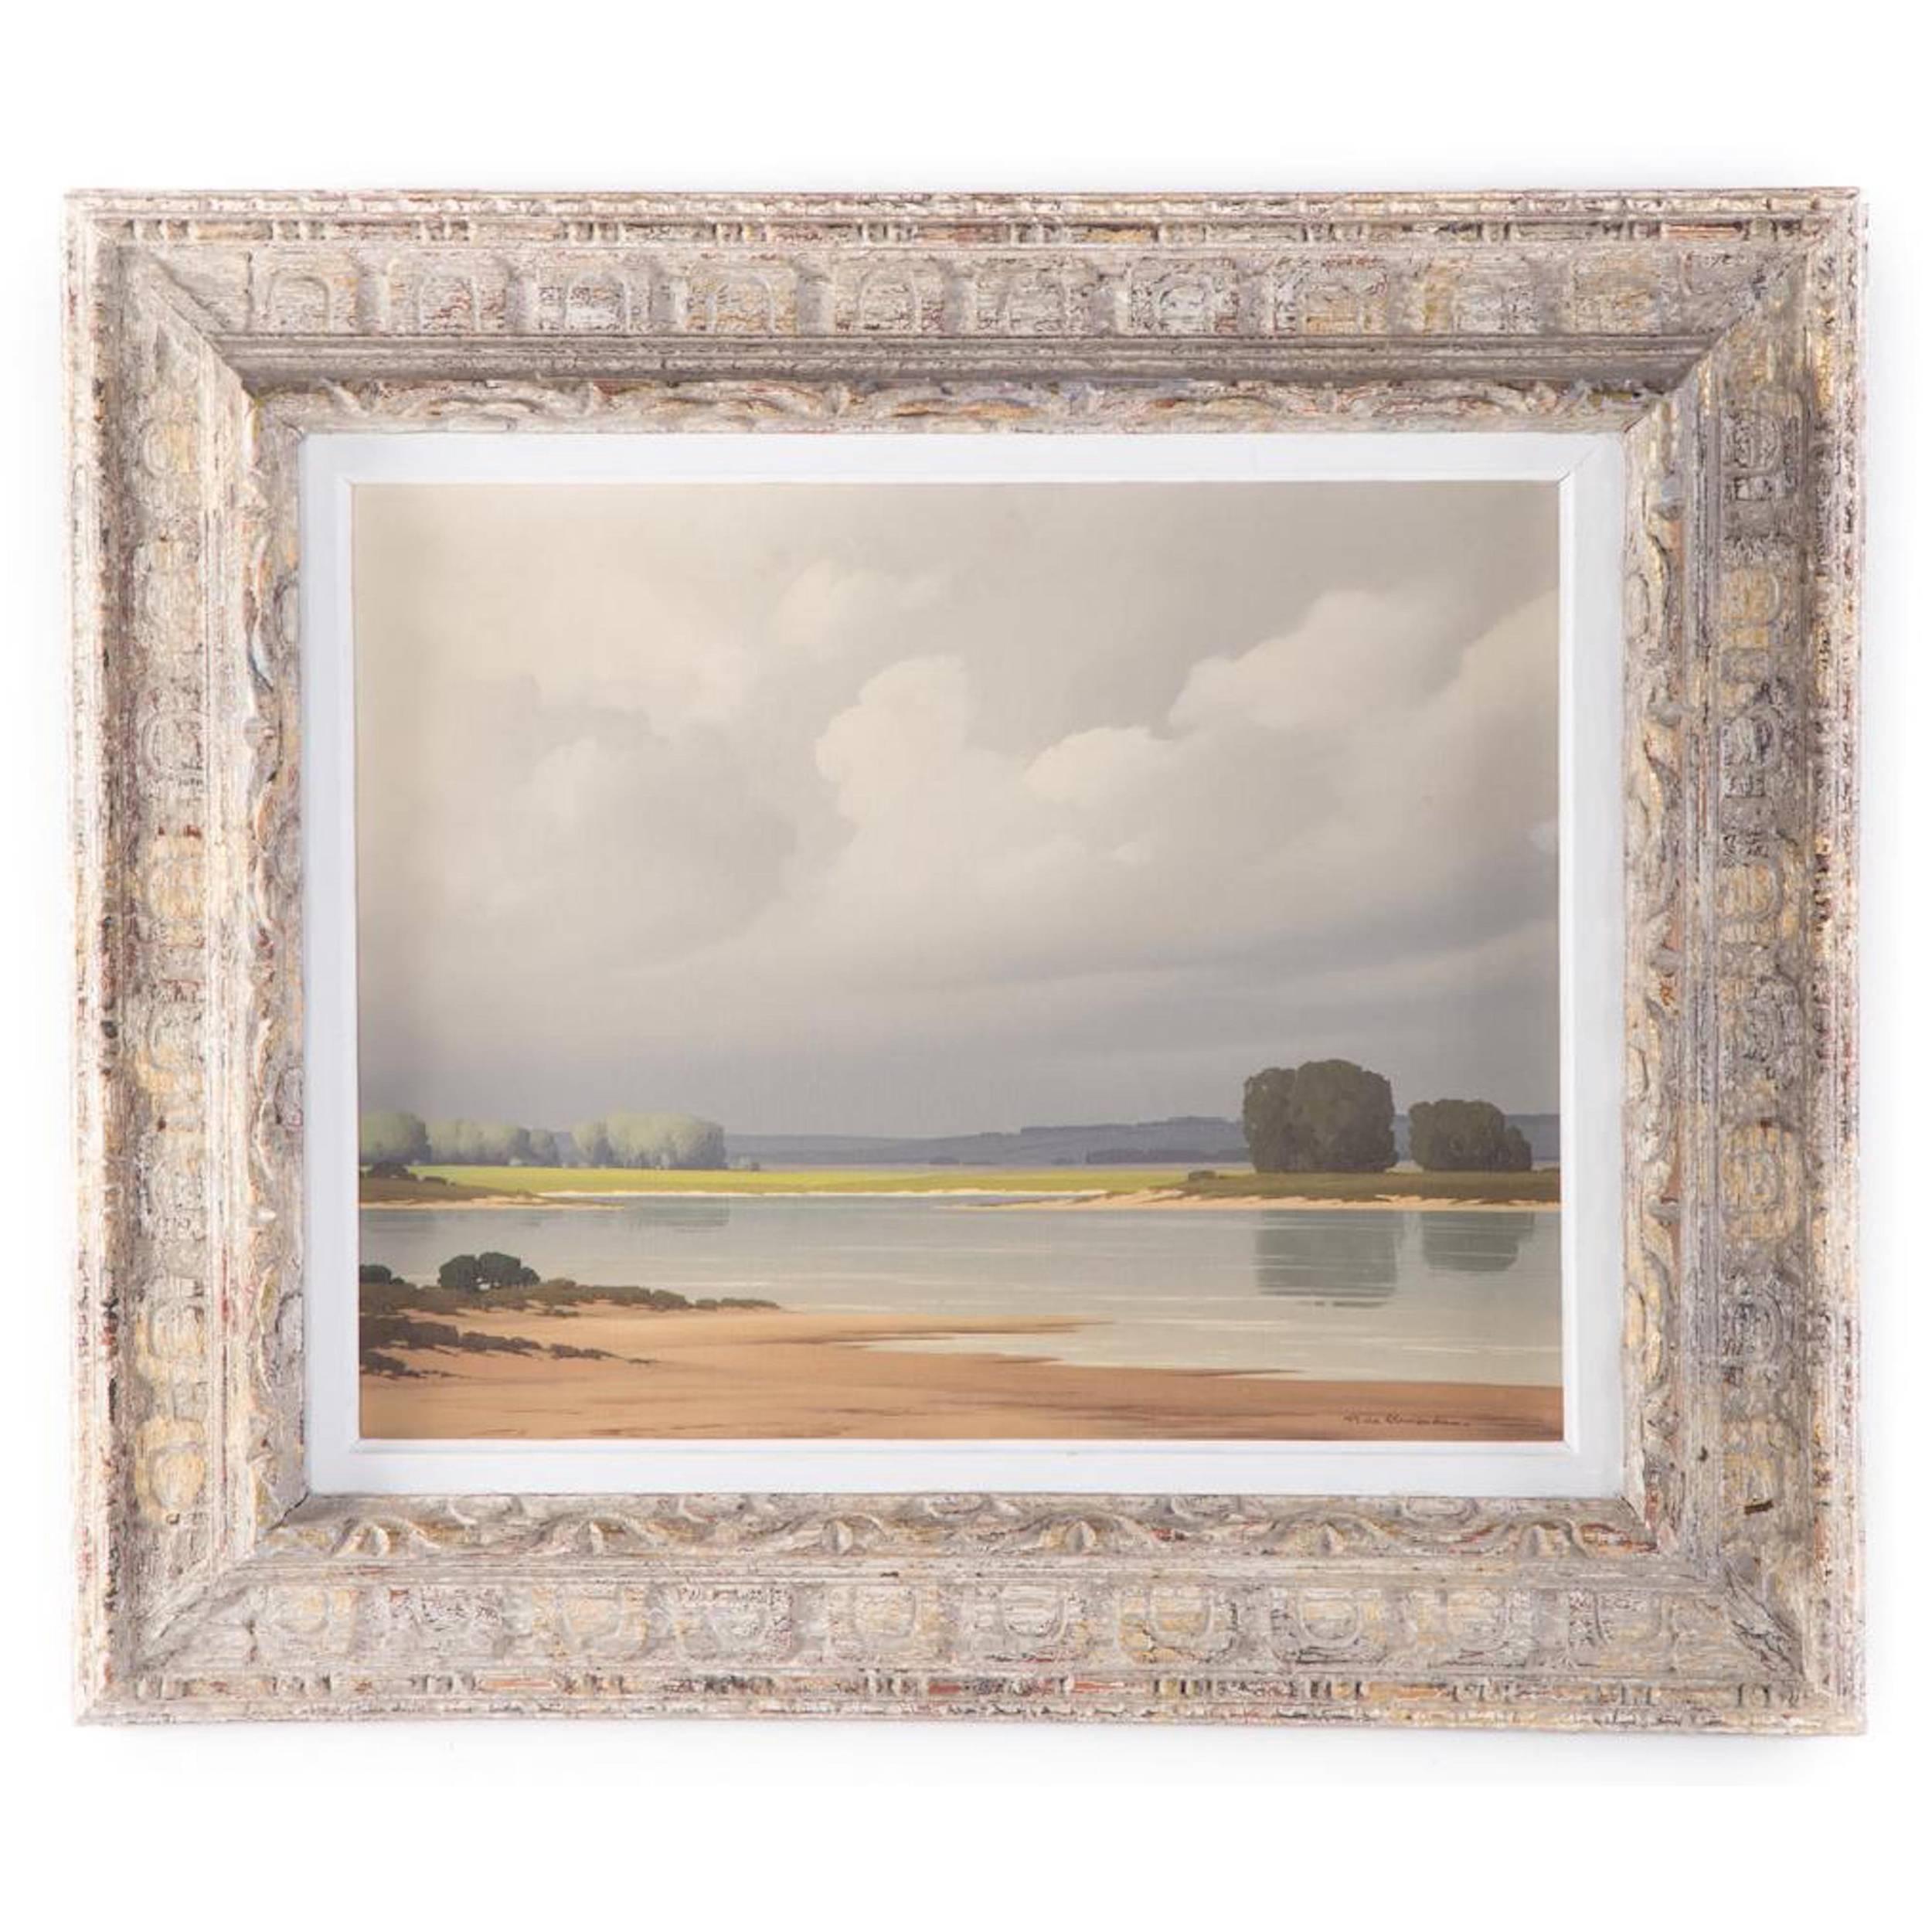 "View of the Loire" by Pierre de Clausade